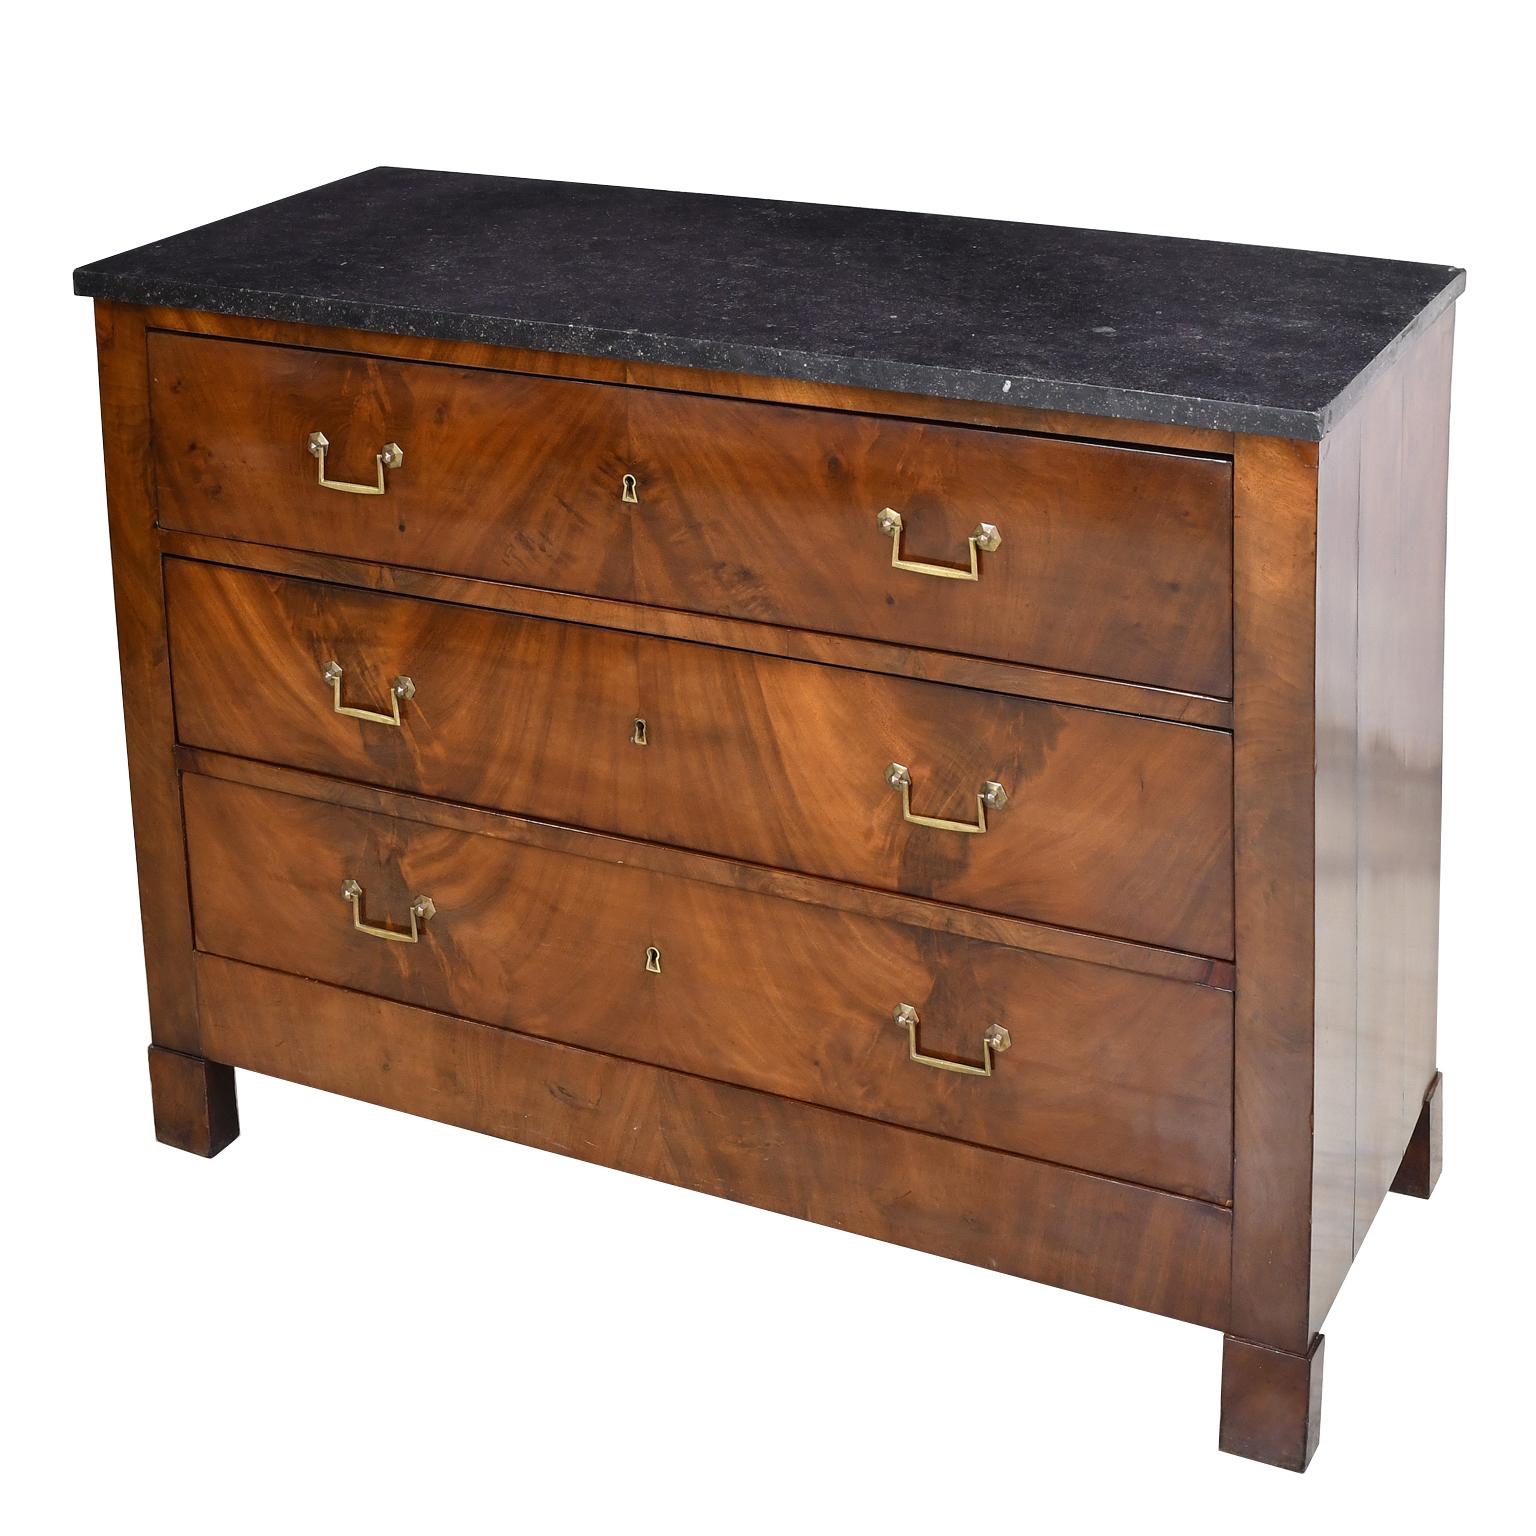 A handsome Directoire chest in West Indies mahogany with original black marble top, three drawers with original brass drop-bail pulls, and resting on square block feet. Features a beautiful bookmatched figured mahogany on the drawer fronts, France,